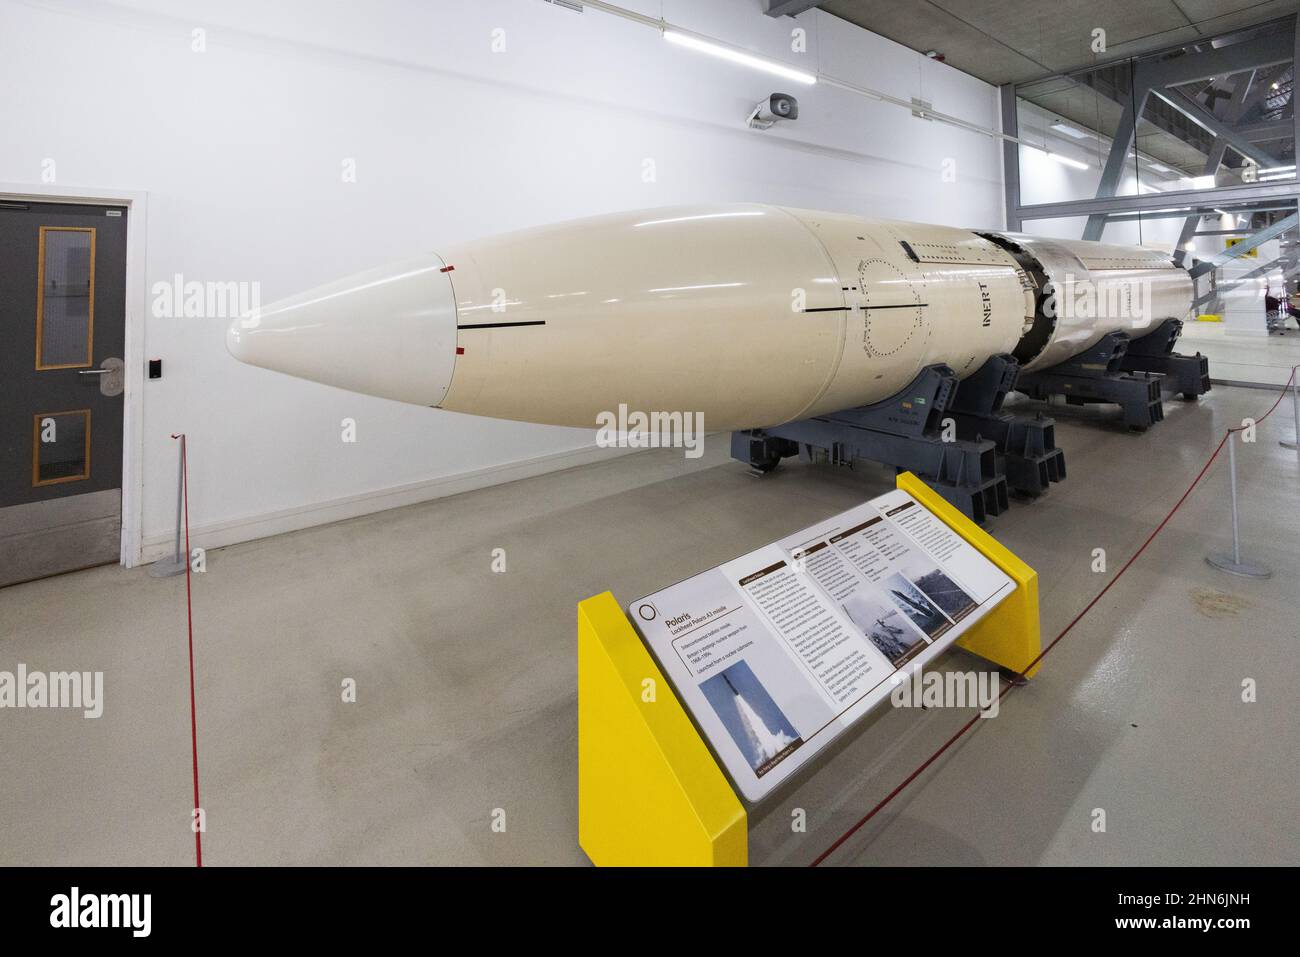 Lockheed Polaris A3 Missile, a Polaris missile, used by the UK in the 1960s  on show at Duxford Imperial War Museum, Cambridgeshire UK Stock Photo